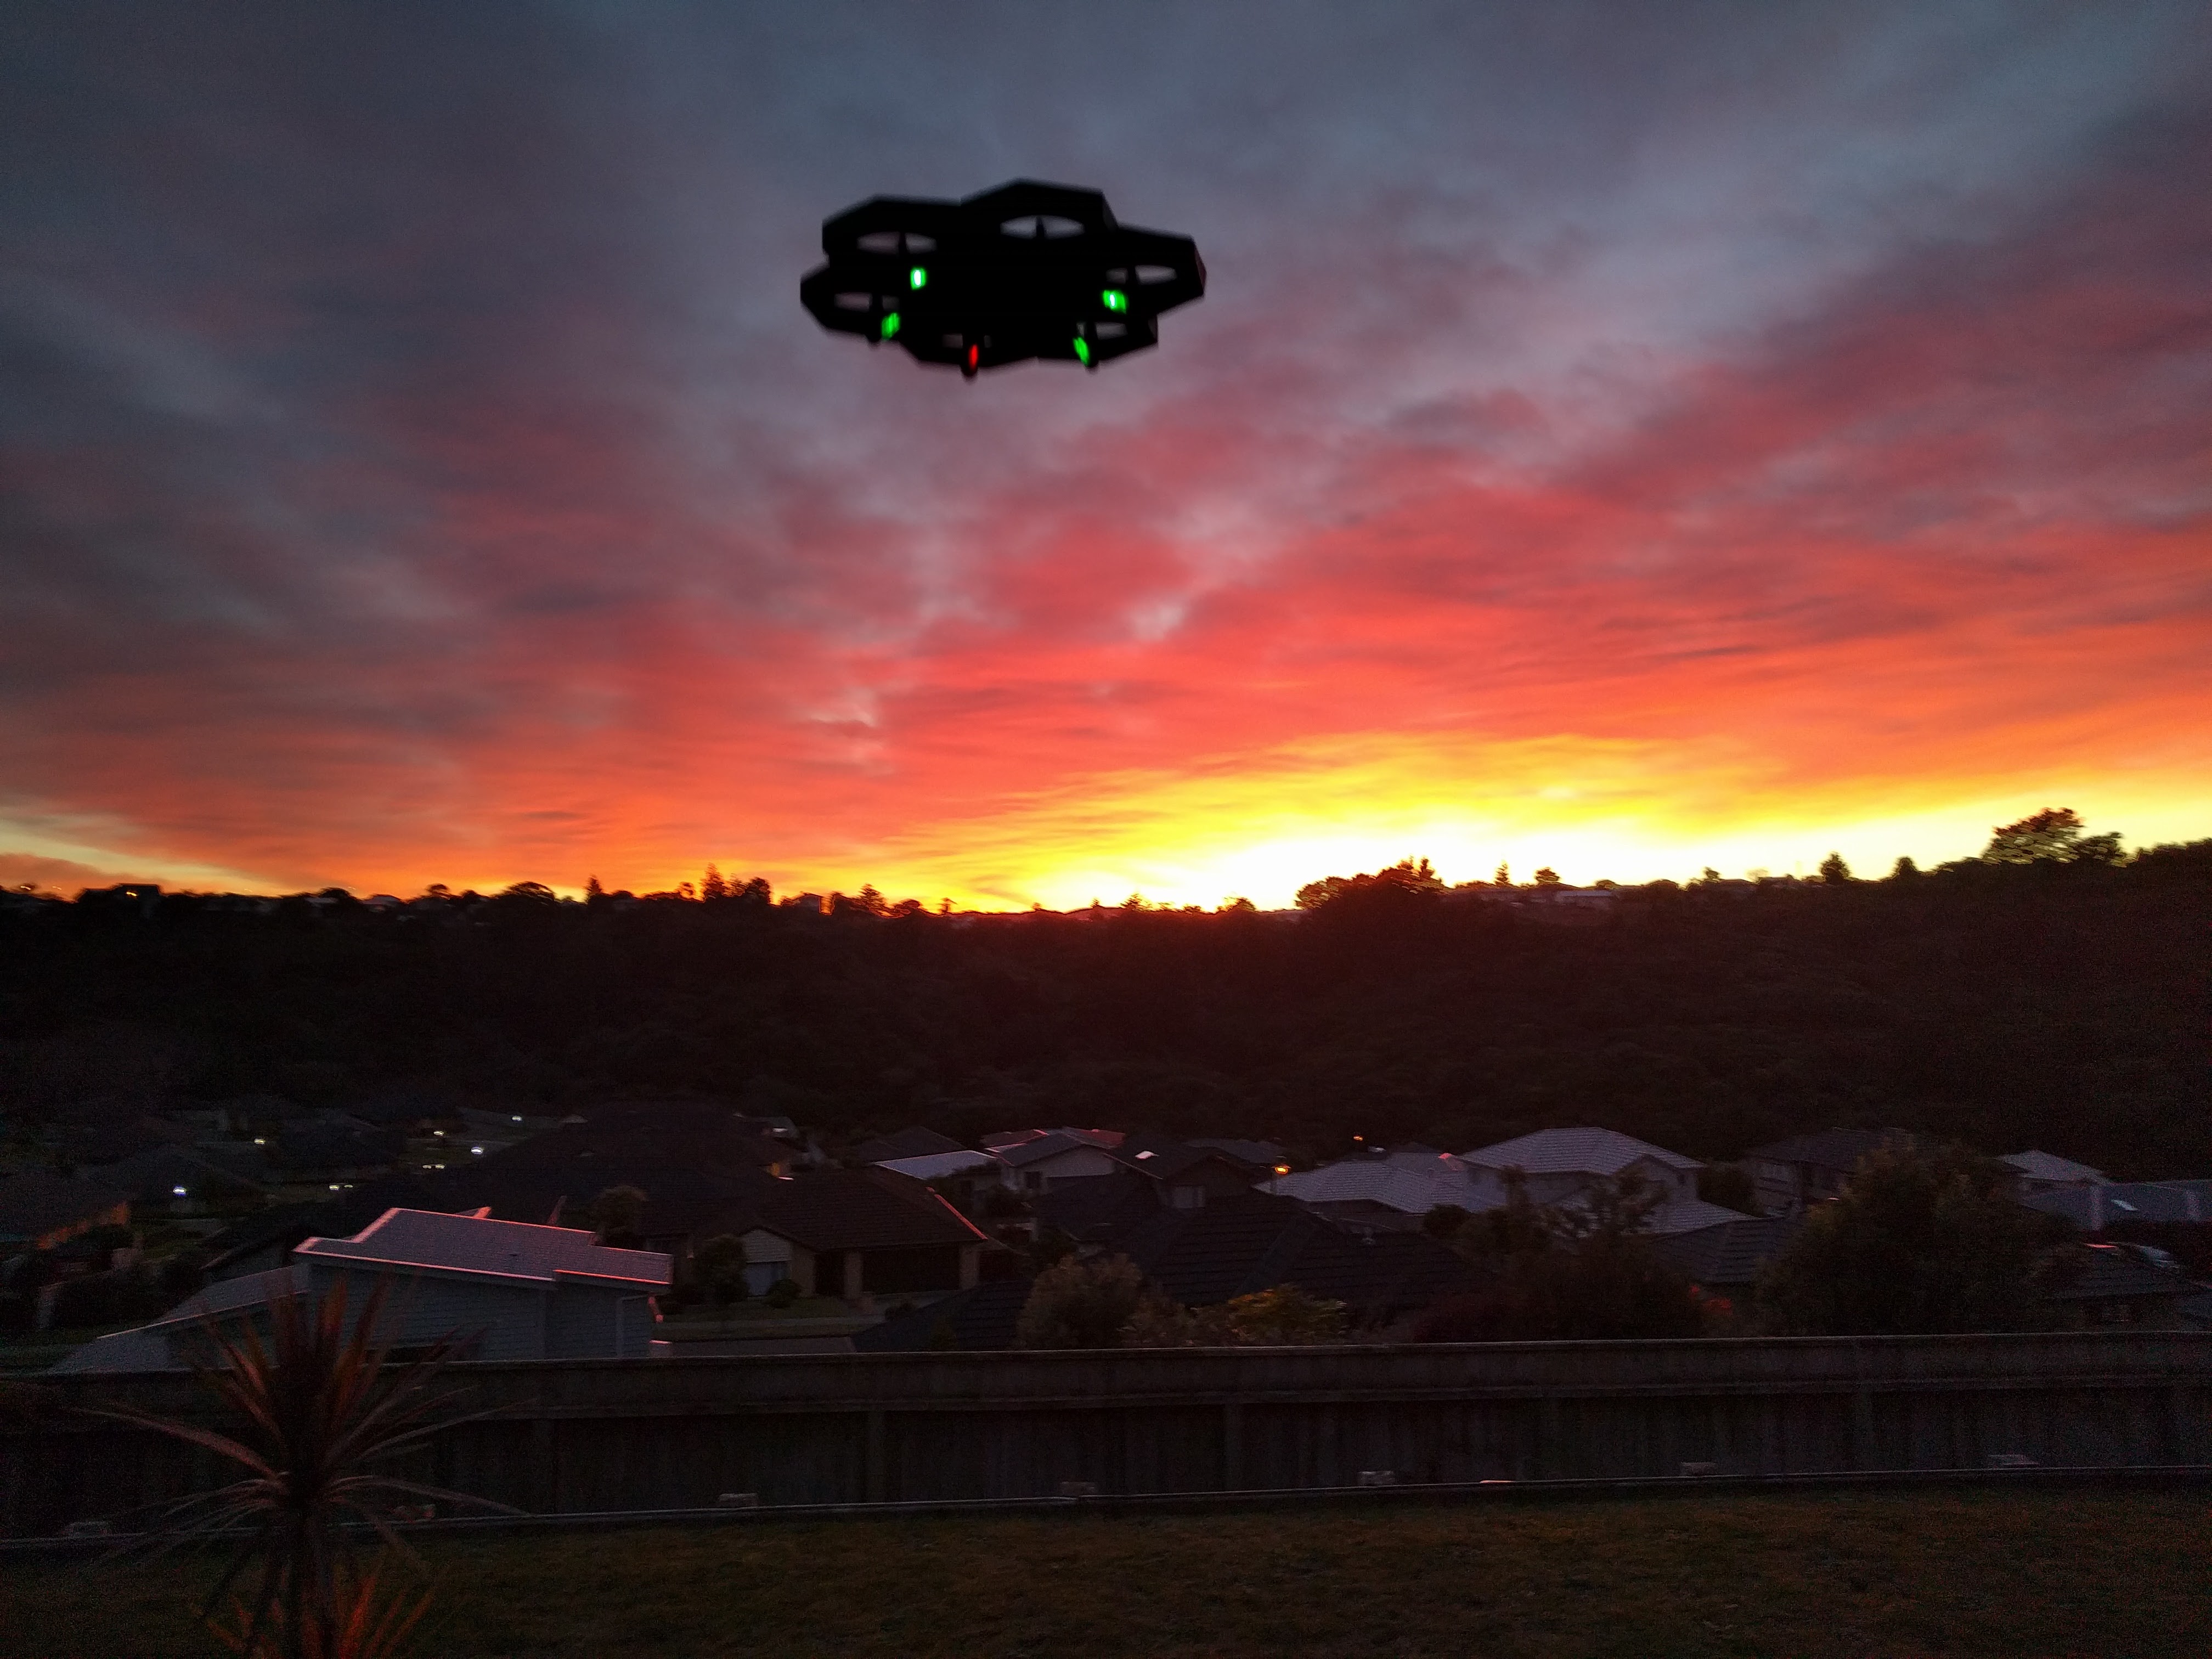 Drone flying in the sunrise